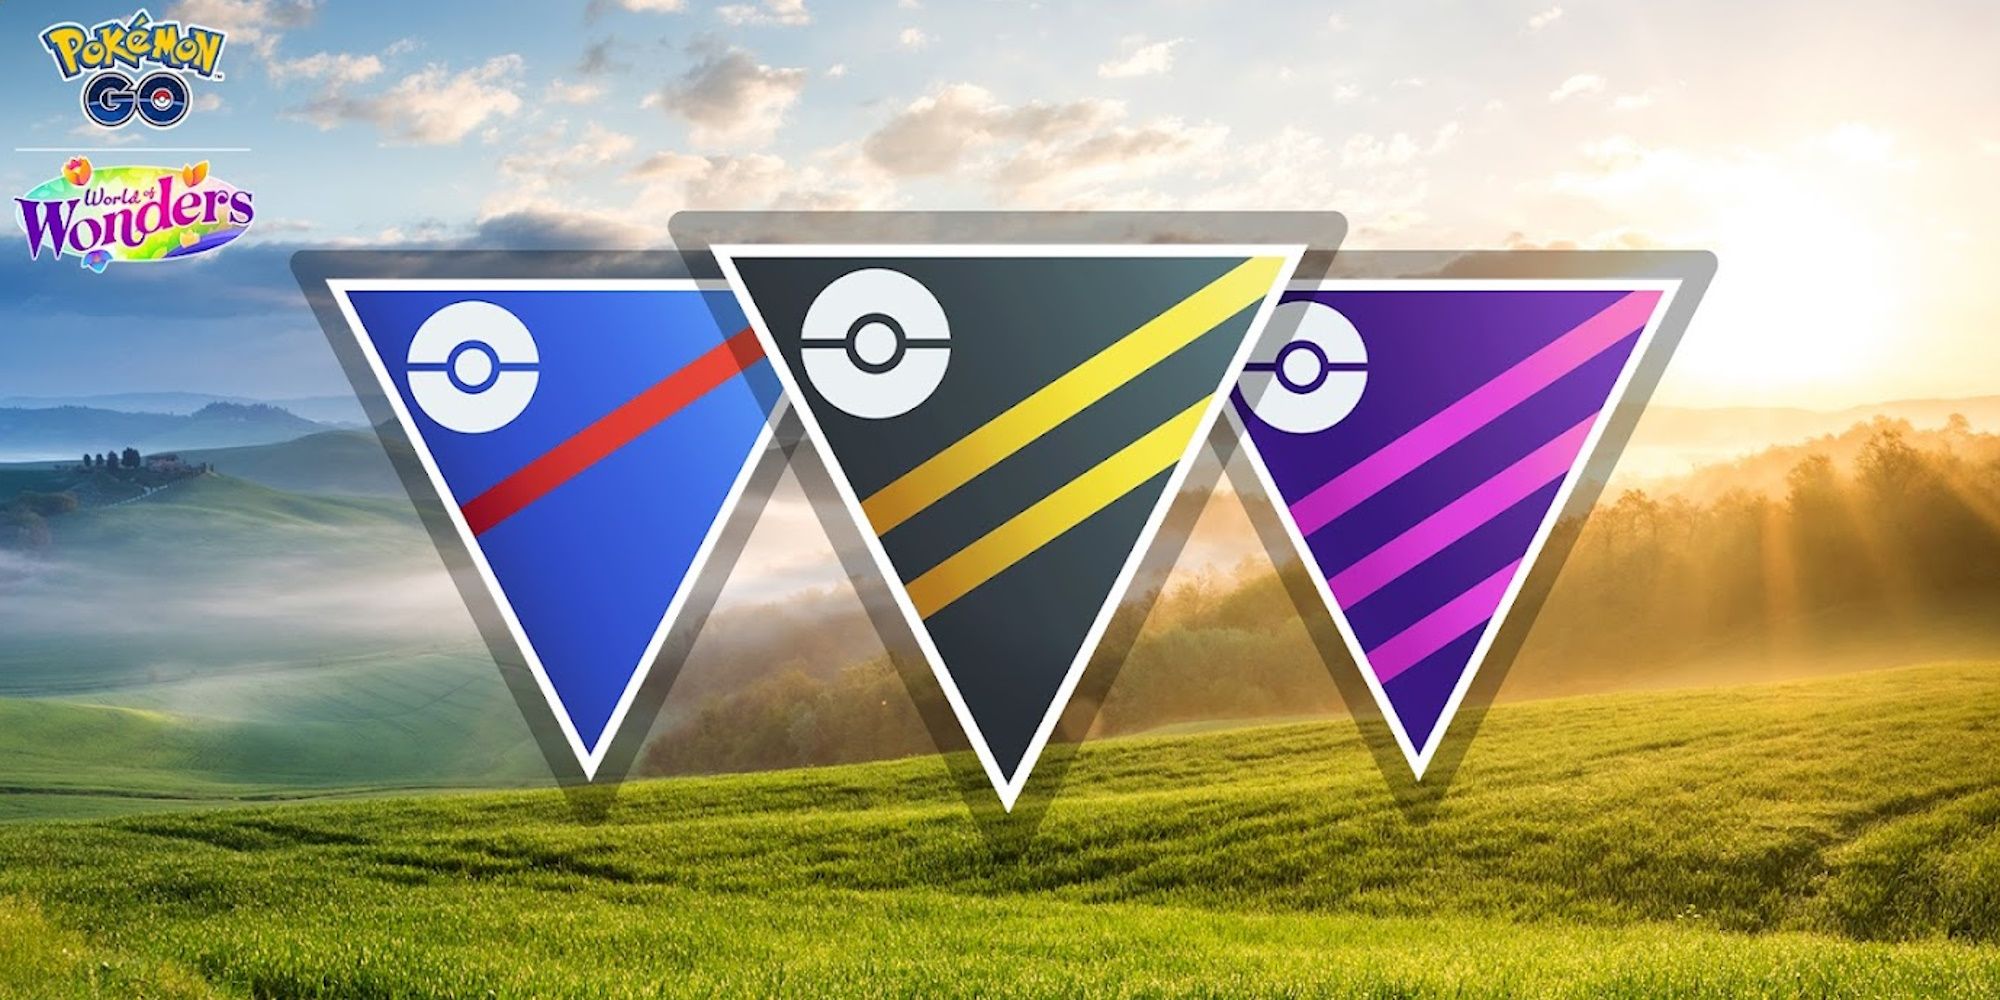 Dates And Details For The Pokemon Go: Winter Holiday Event